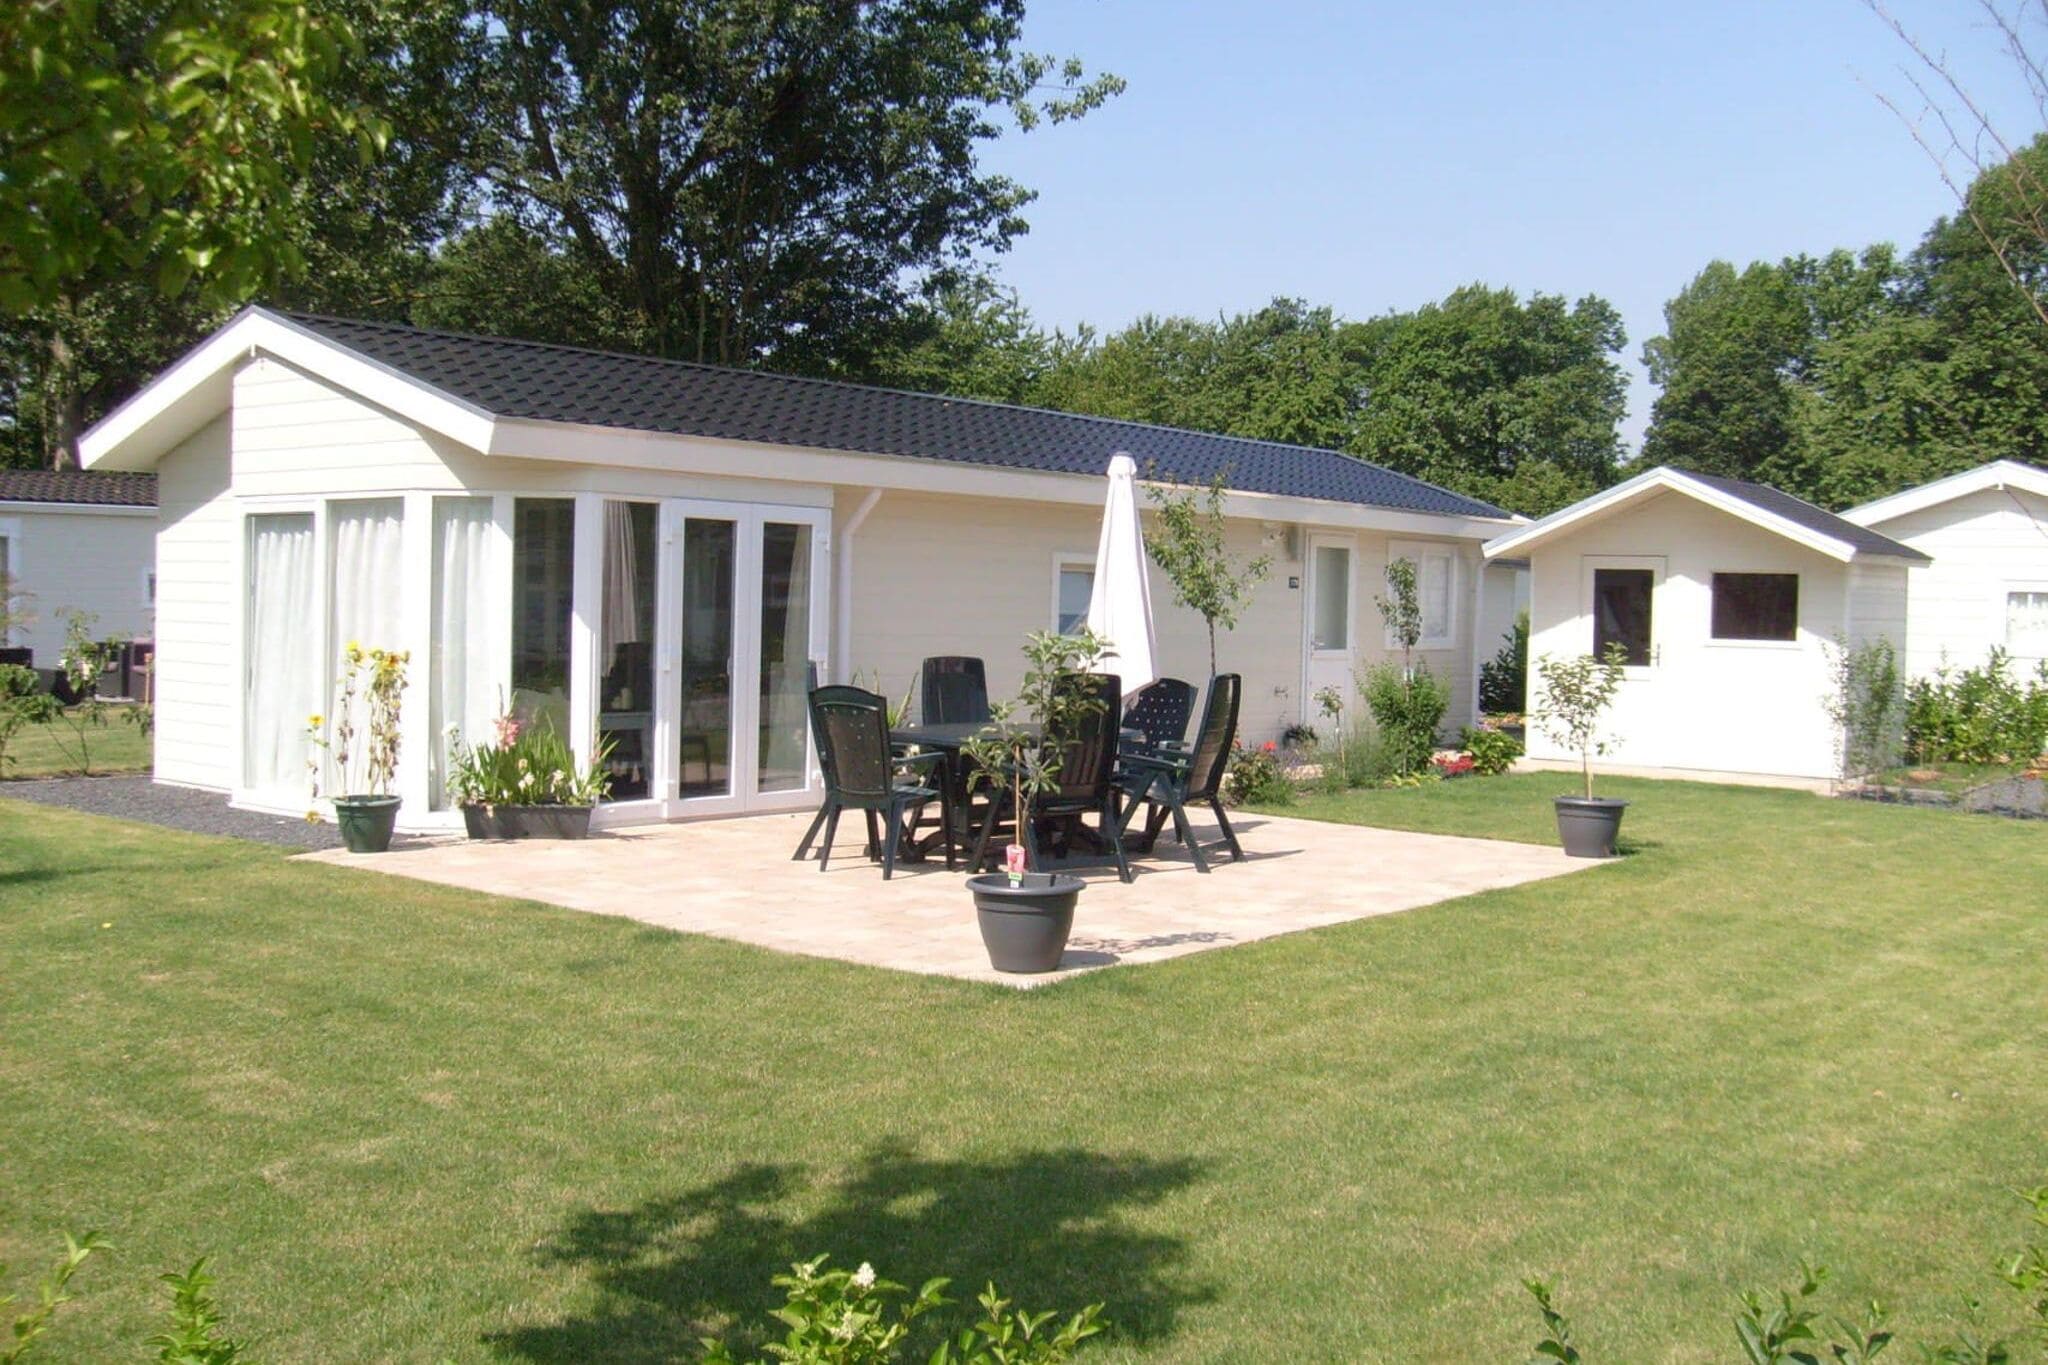 Nice chalet on a holiday park 25 km from Amsterdam